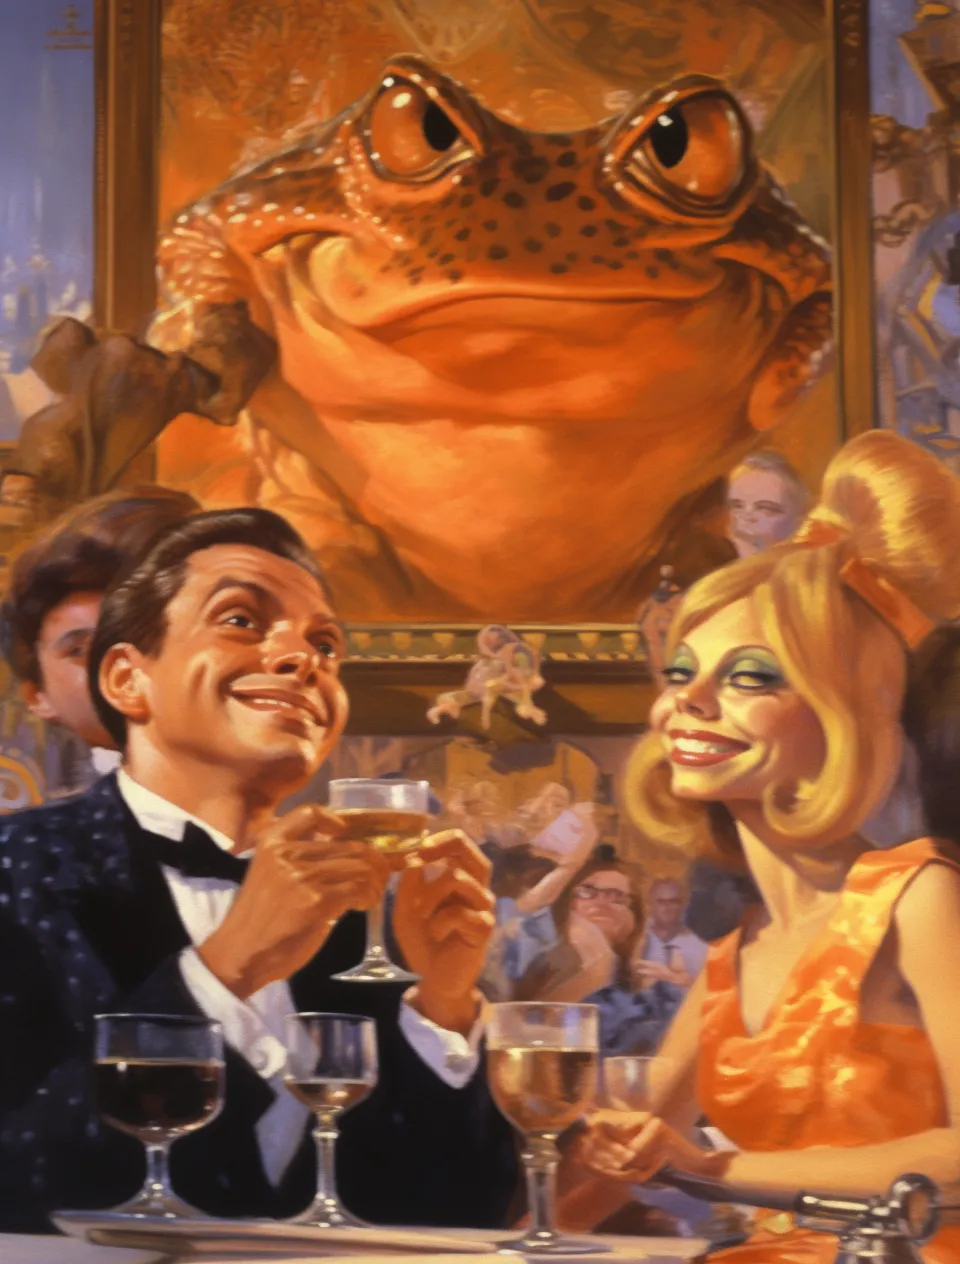 DBK_the_orange_golden_toad_with_ivanka_person_and_mariano_in_th_d69fca05-da0d-42b7-bfca-26b31cb956cd.png